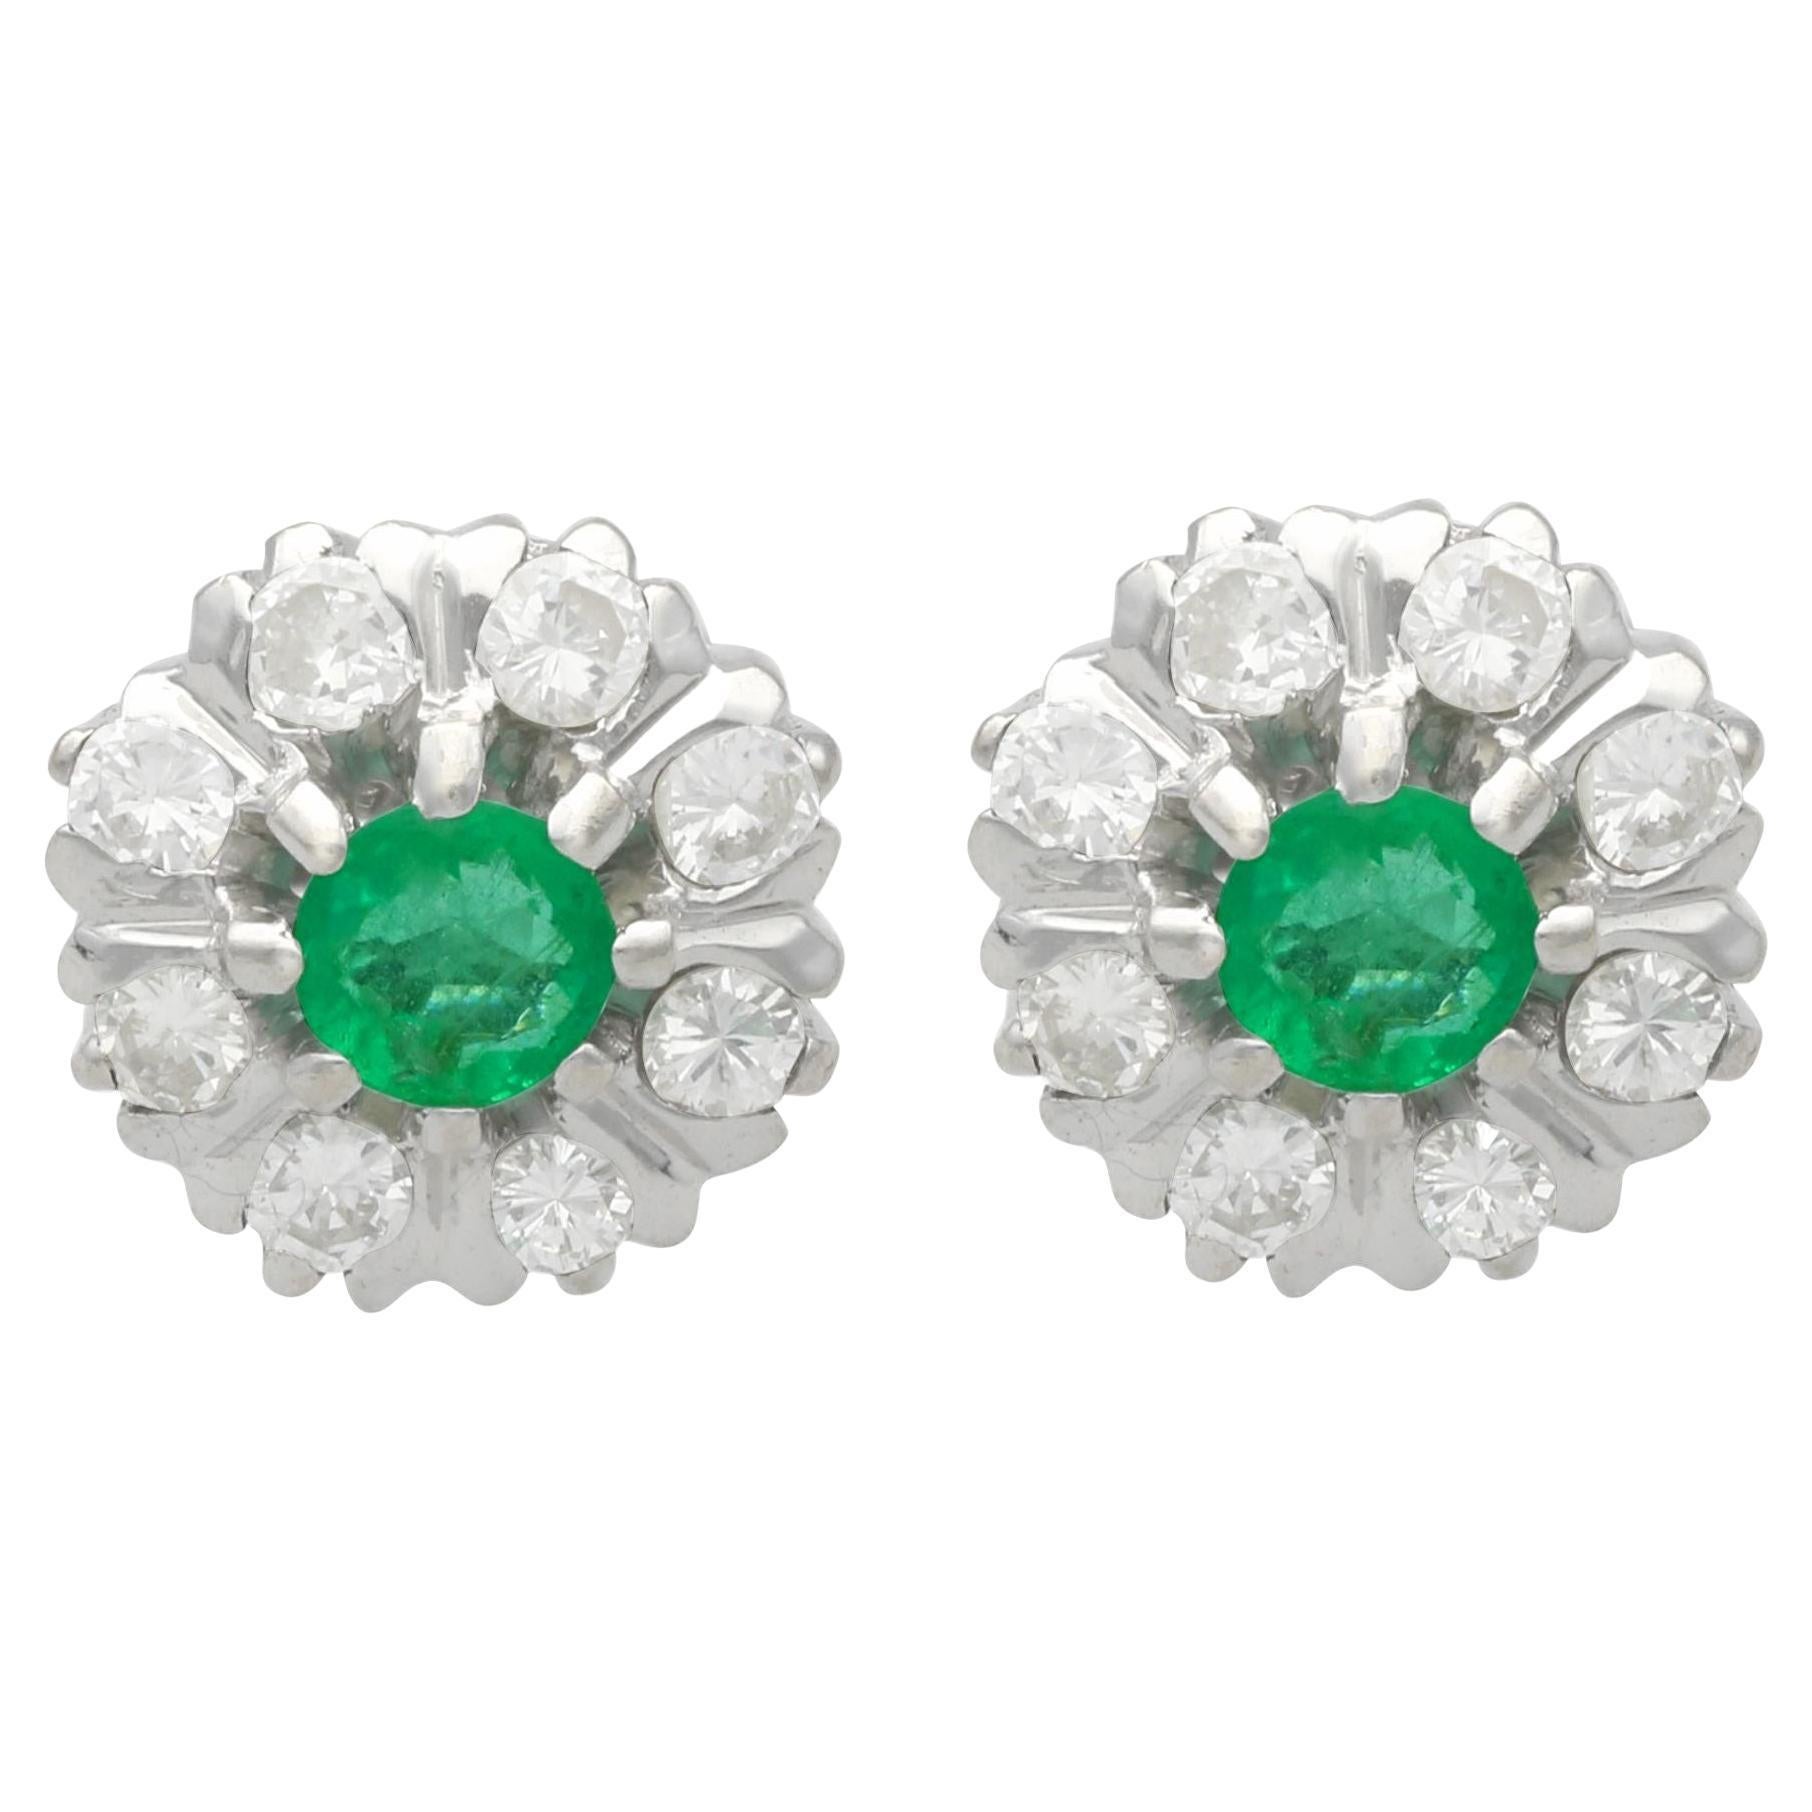 Vintage 0.56 Carat Emerald and 0.65 Carat Diamond White Gold Cluster Earrings